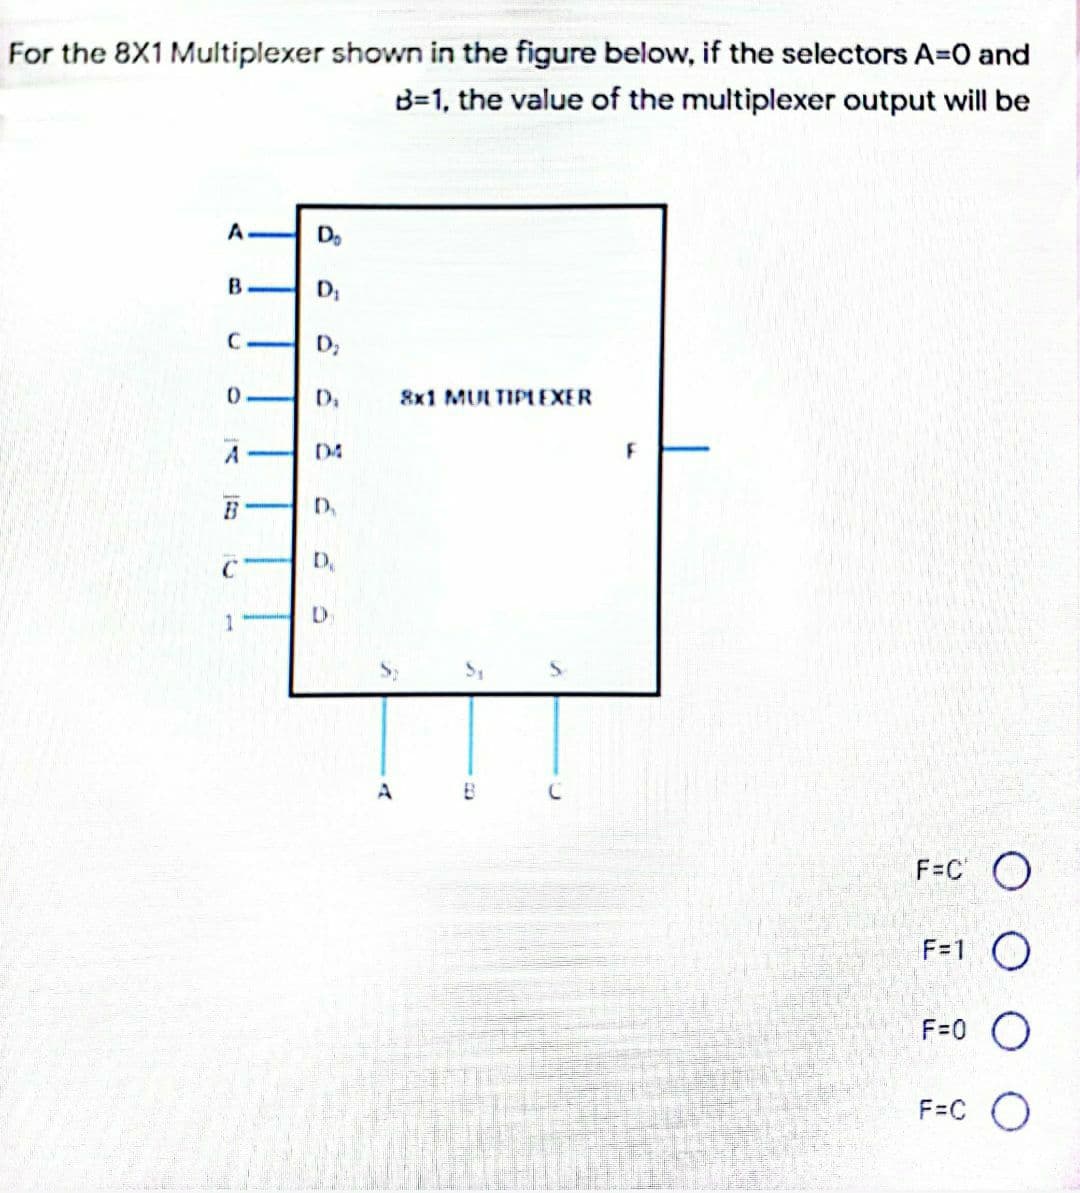 For the 8X1 Multiplexer shown in the figure below, if the selectors A=0 and
B=1, the value of the multiplexer output will be
A
Do
B
C H D;
8x1 MULTIPLEXER
04
D.
1
F=C O
F=1 O
F=0 O
F=C O
